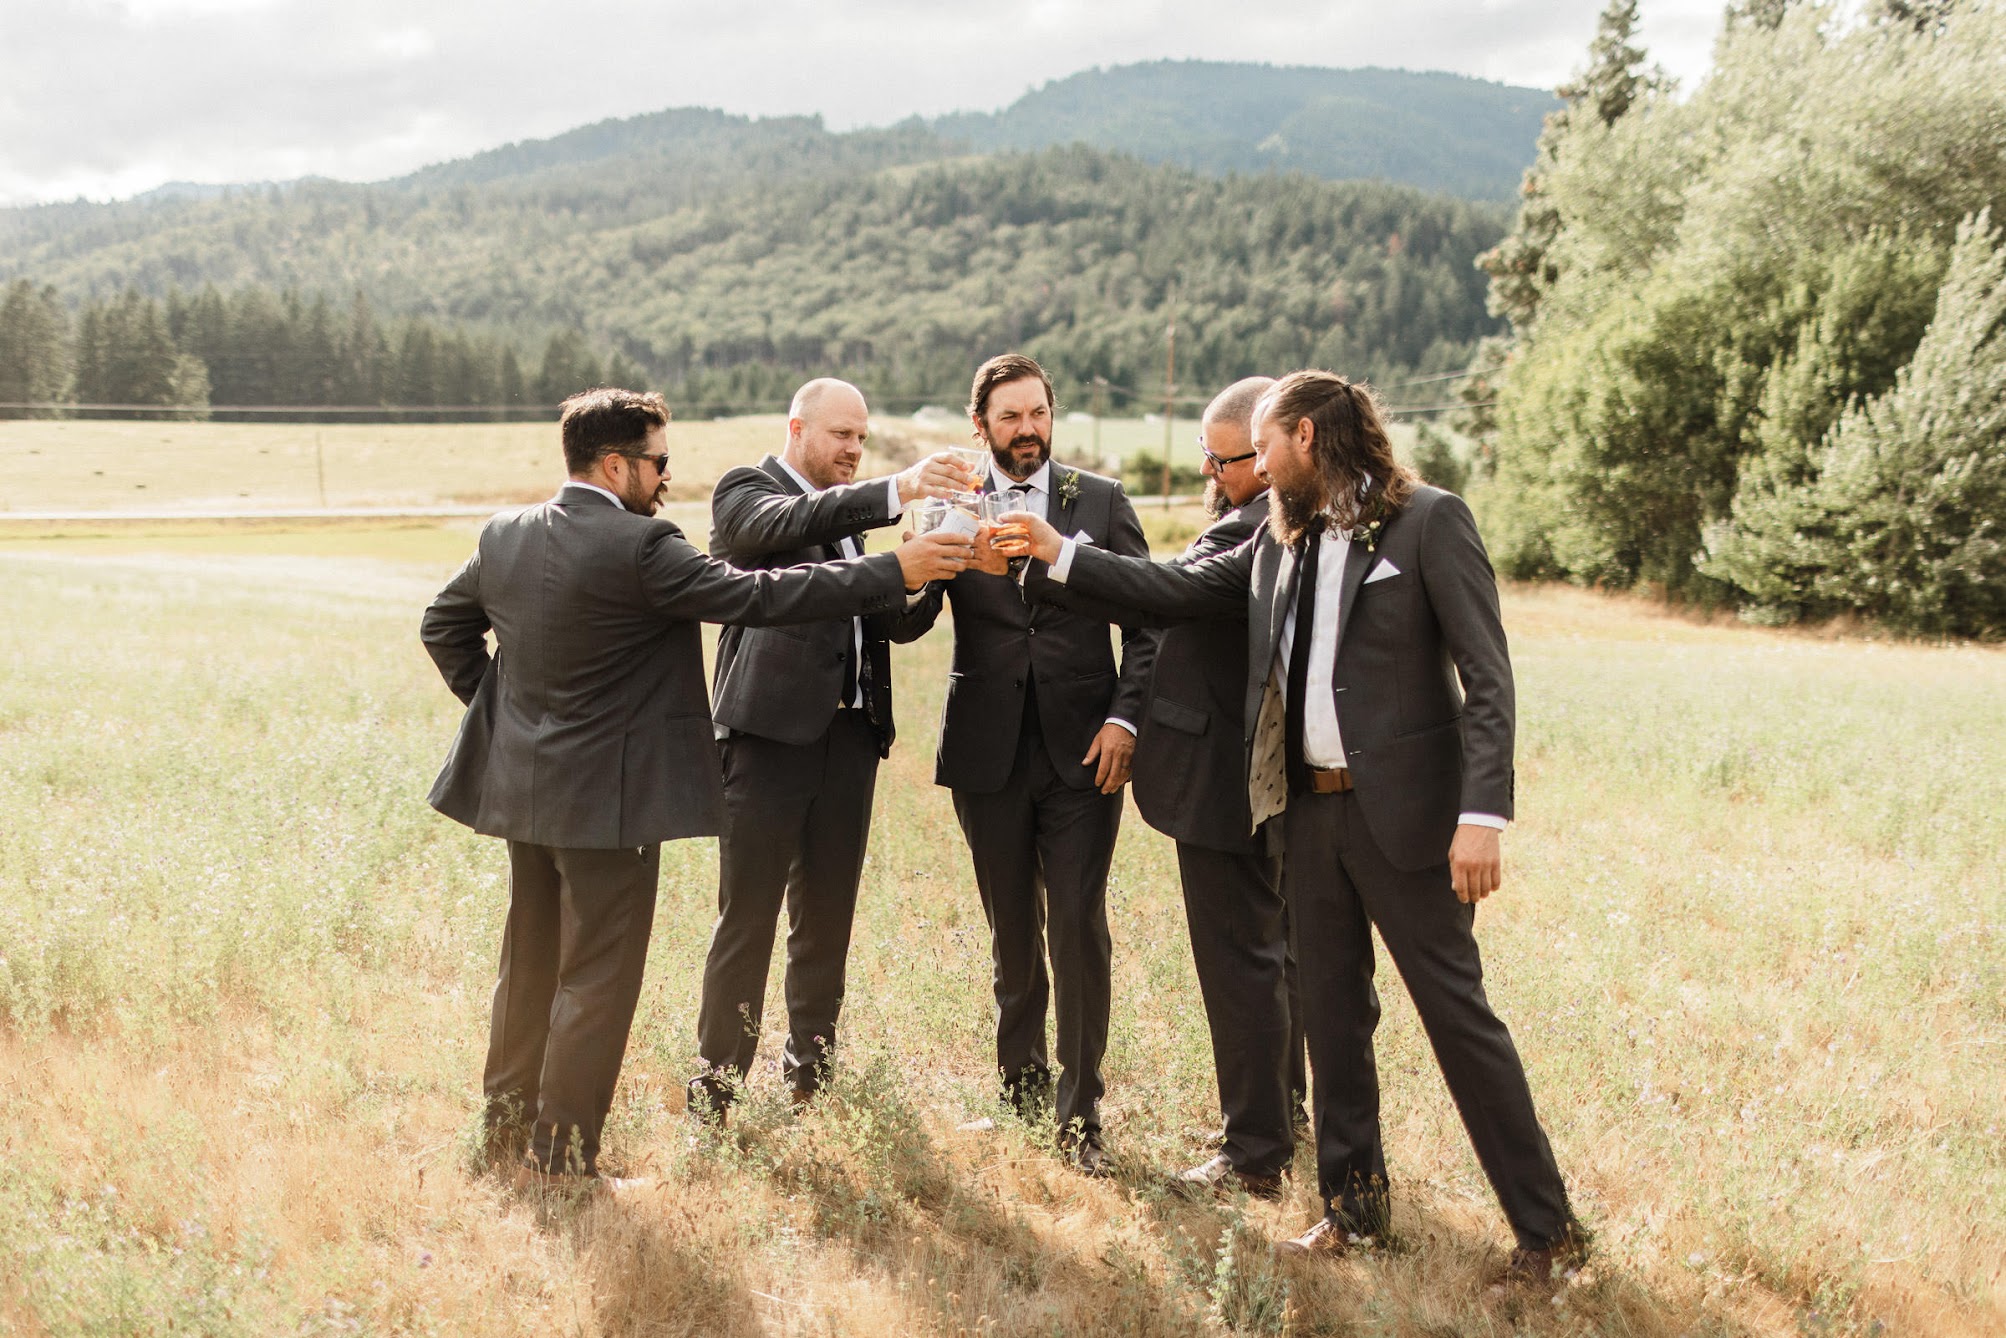 The groomsmen standing in an open field saying "cheers" with their beers